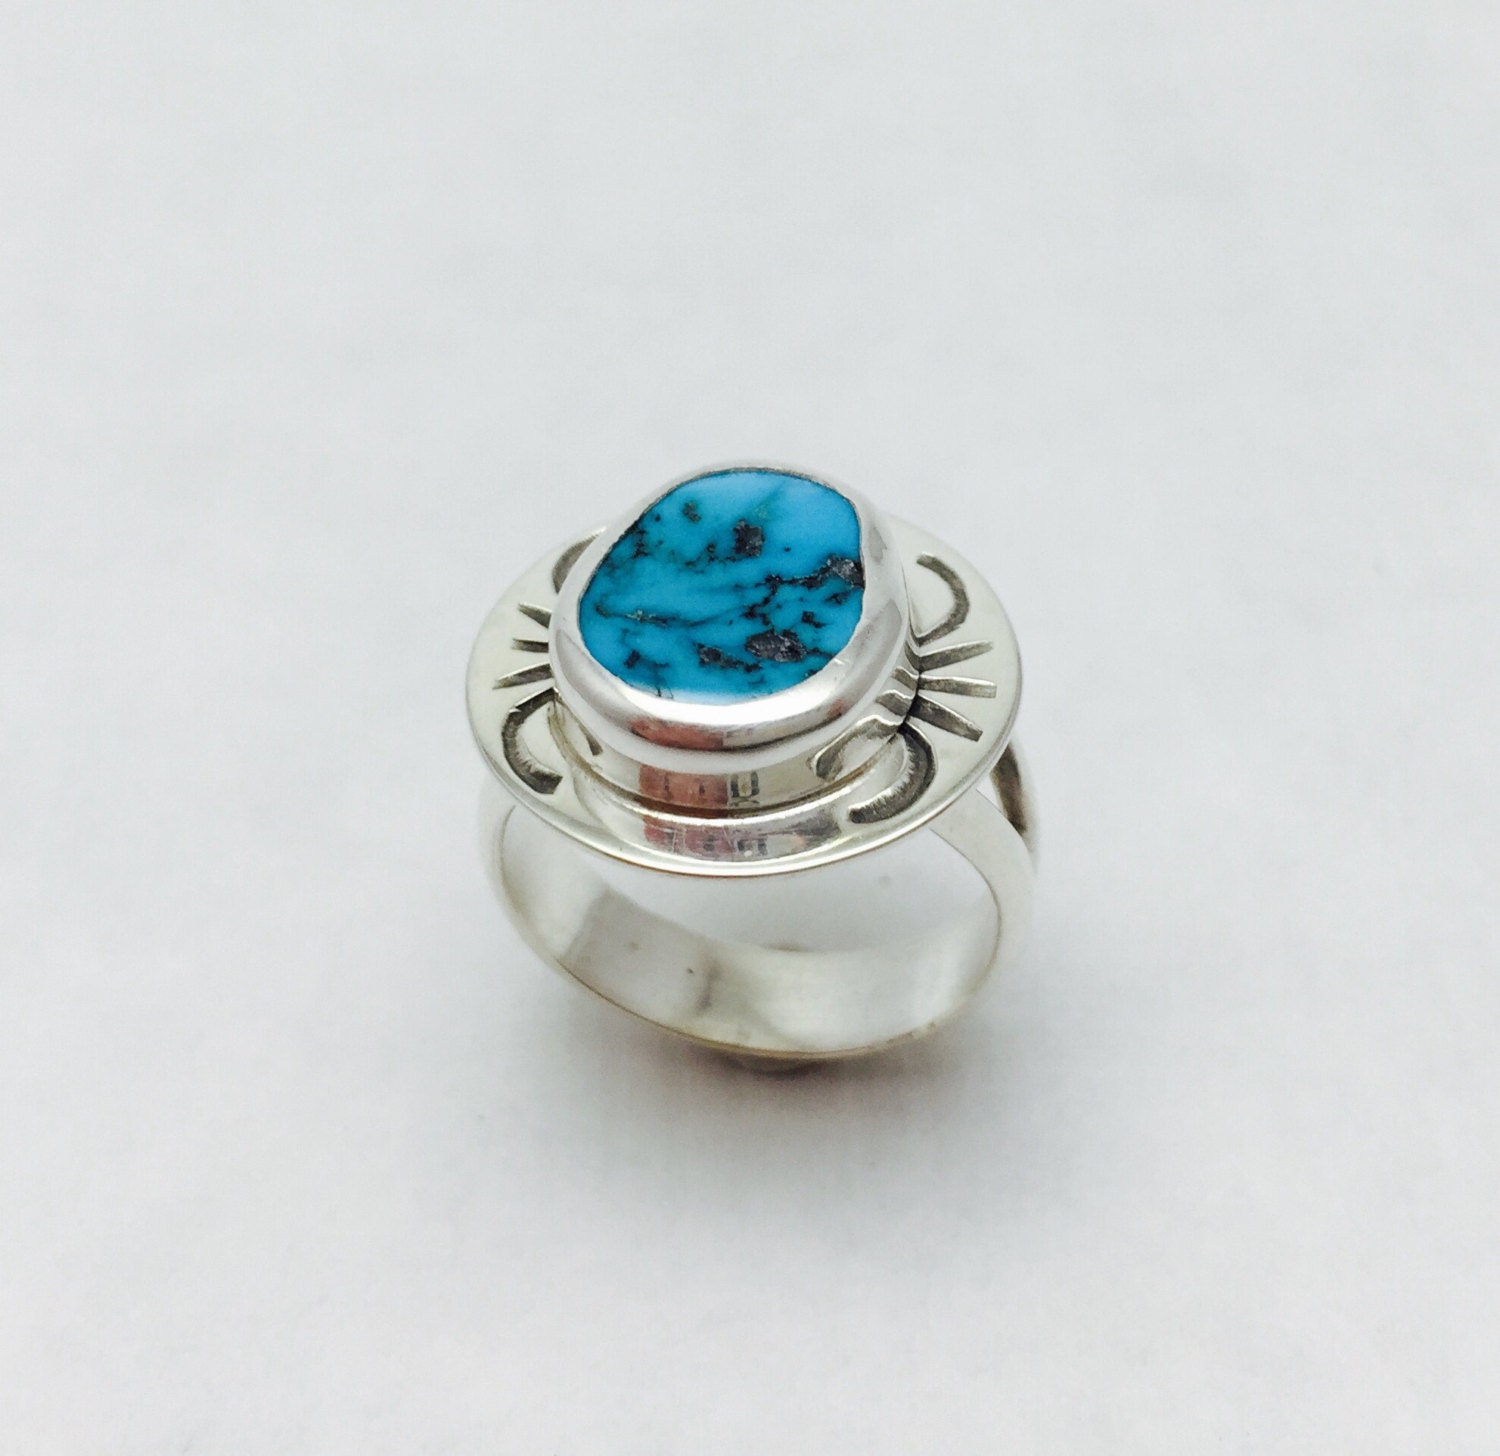 Sleeping Beauty Turquoise Sterling Silver Ring